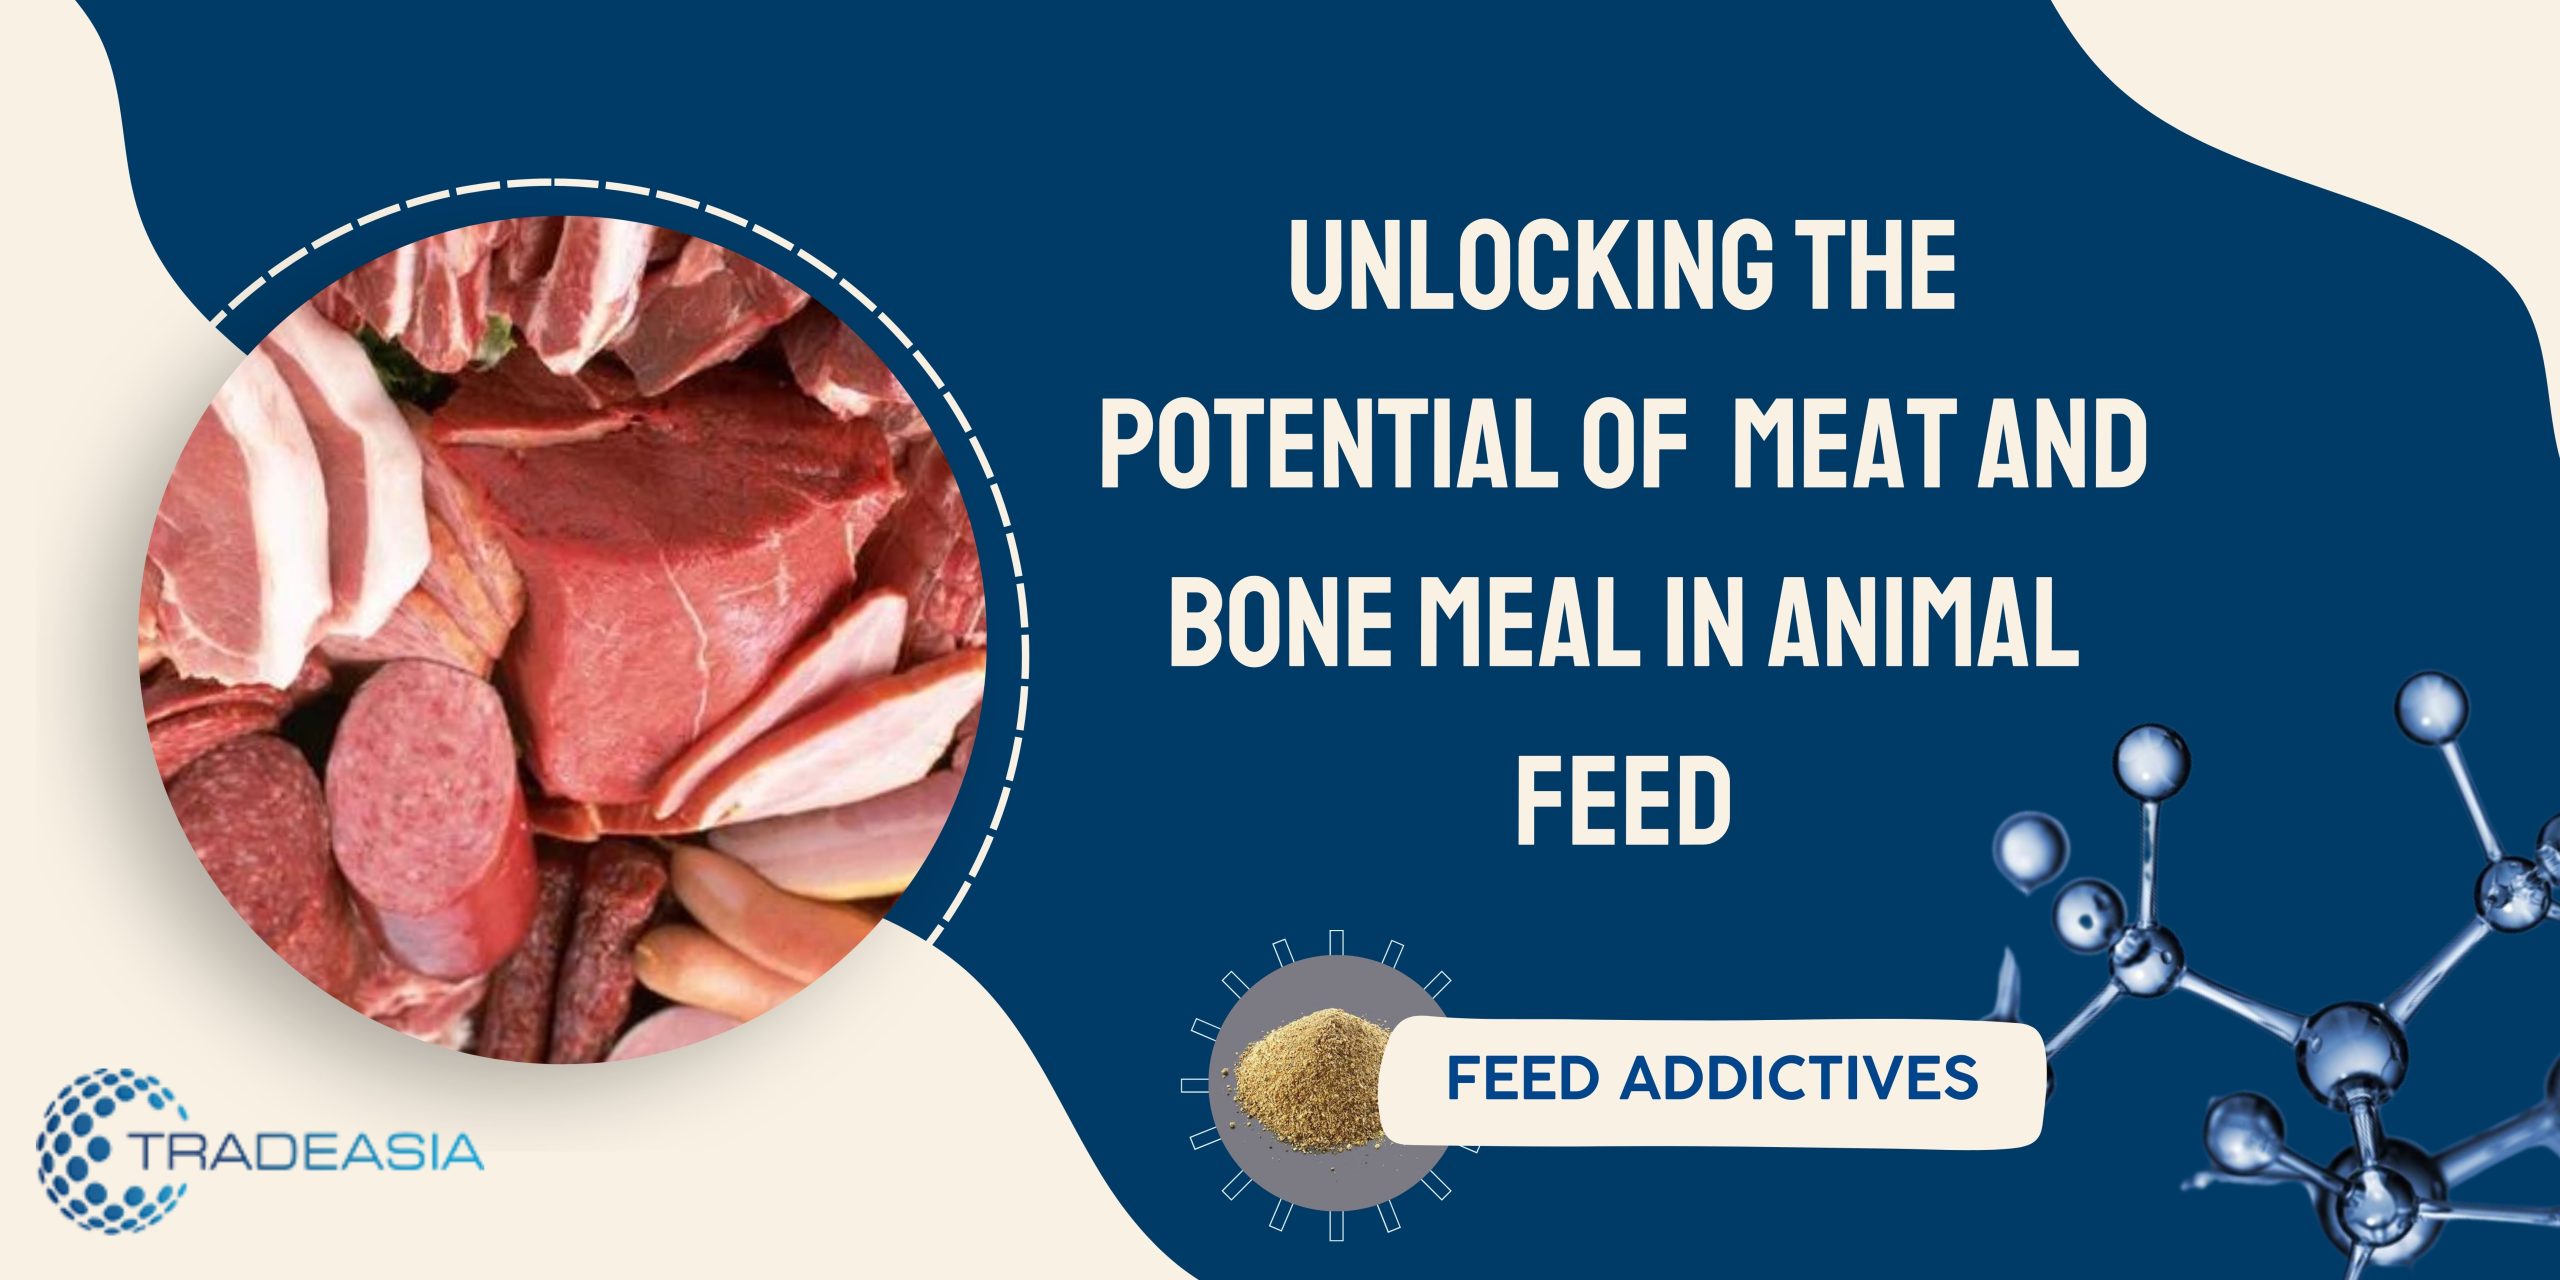 Unlocking the Potential of Meat and Bone Meal in Animal Feed